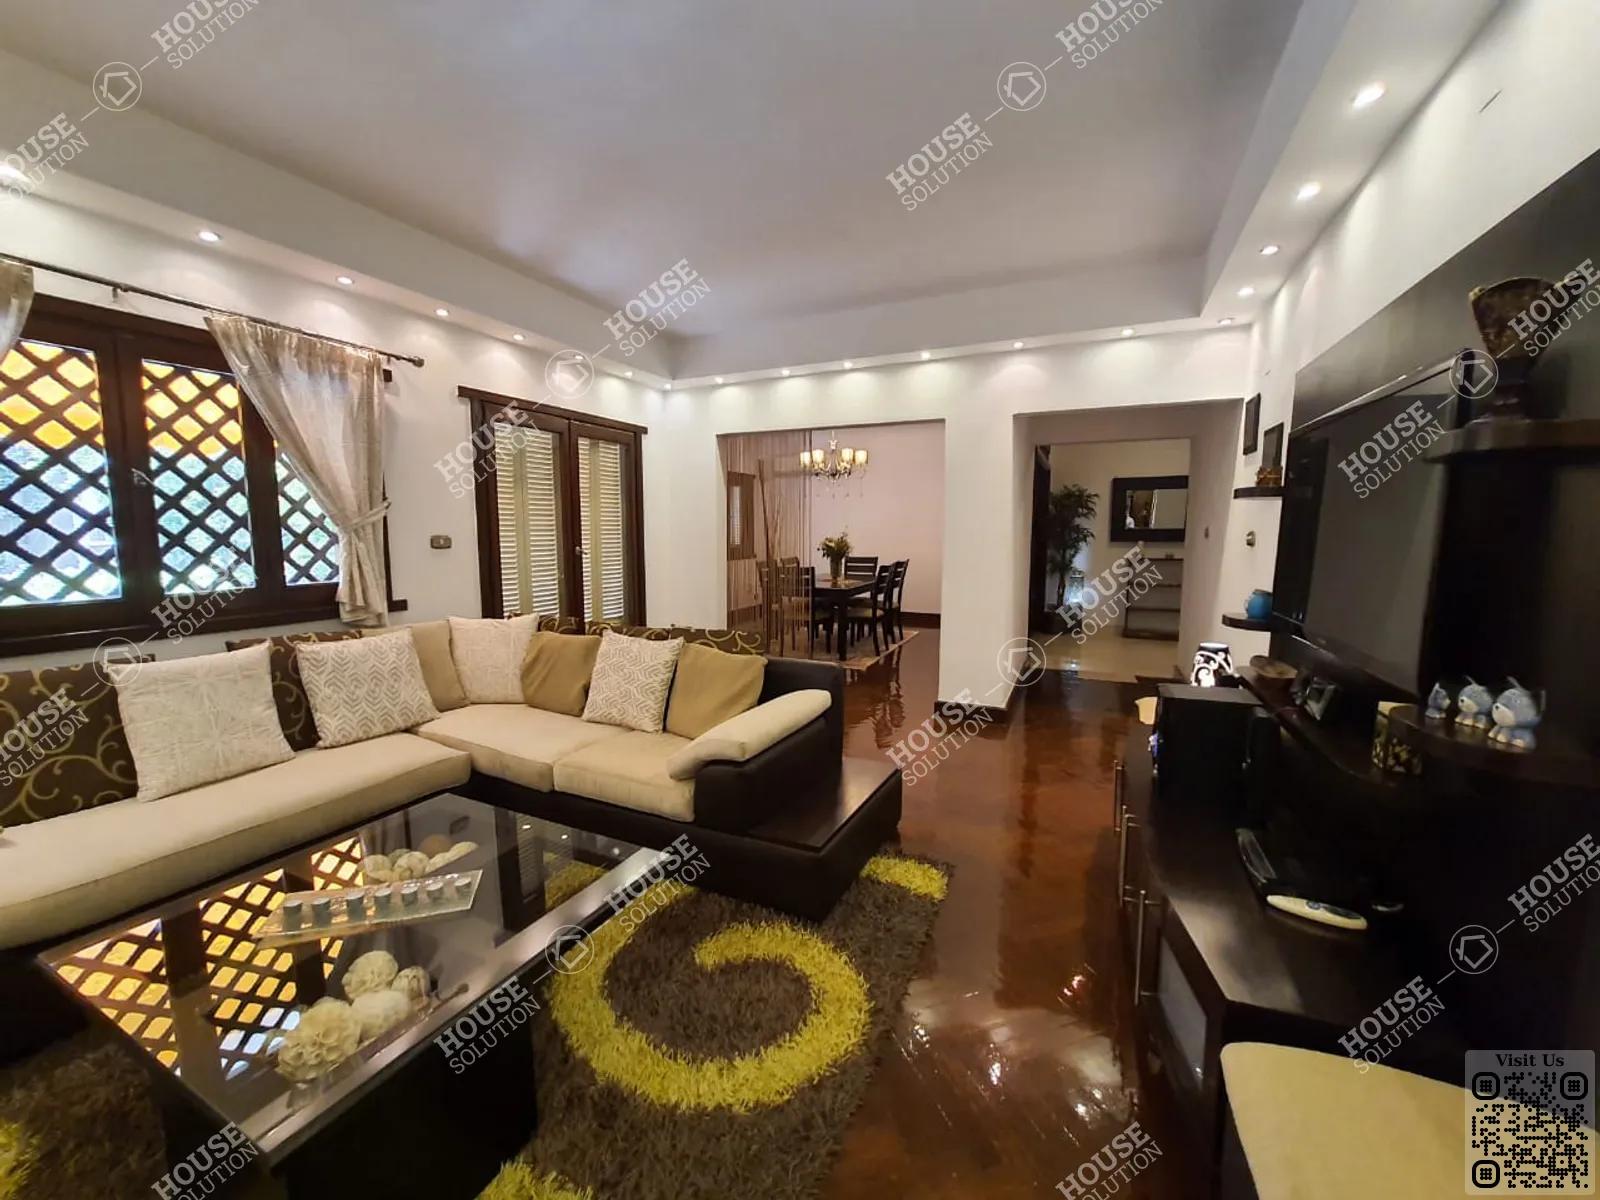 RECEPTION  @ Apartments For Rent In Maadi Maadi Sarayat Area: 180 m² consists of 3 Bedrooms 2 Bathrooms Modern furnished 5 stars #3874-0